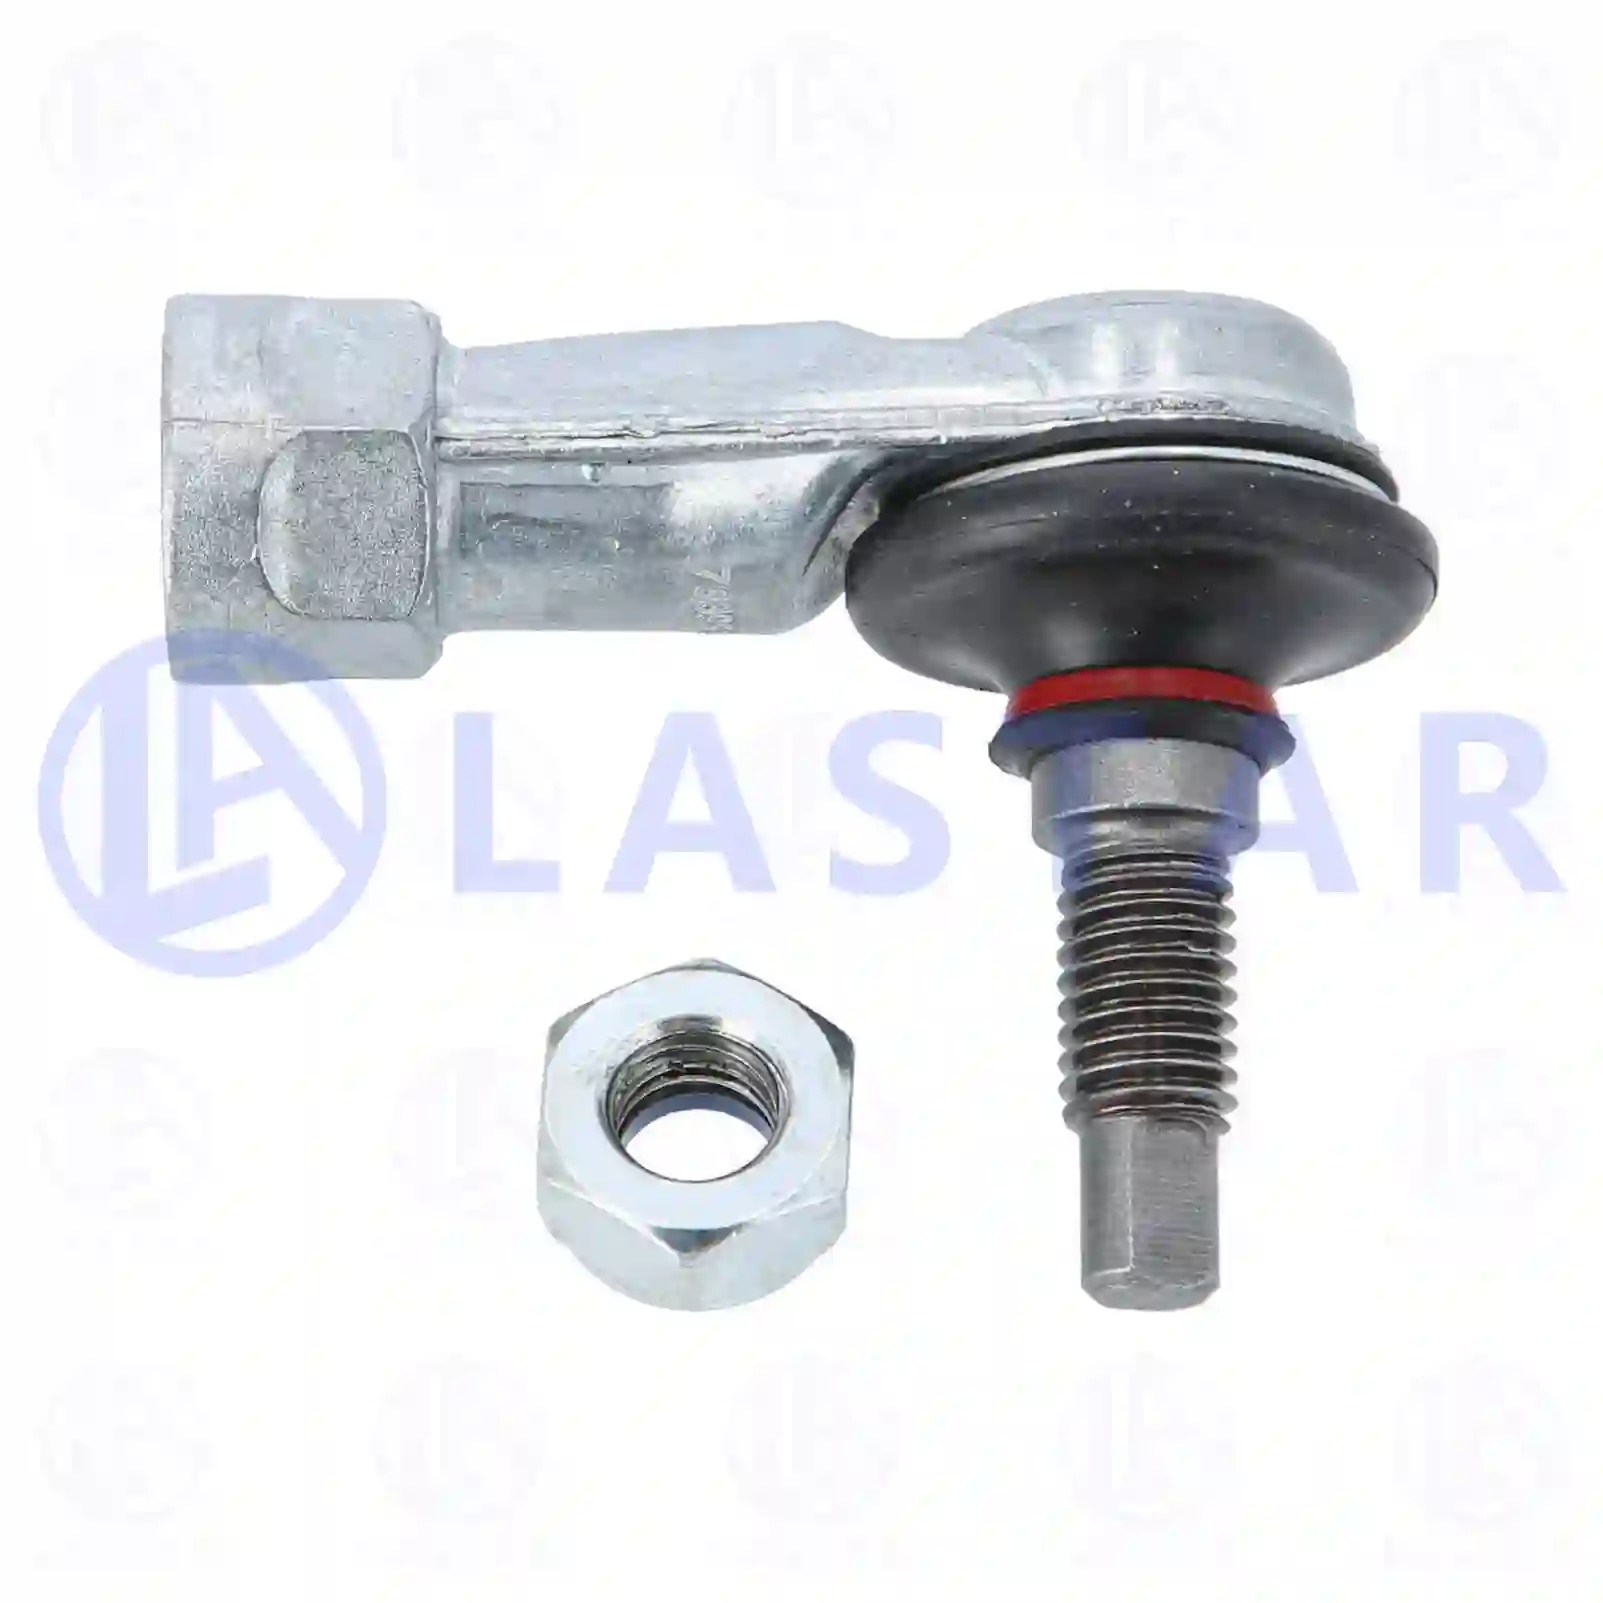 Ball joint, right hand thread, 77731752, 00021928, 3140852R1, 0589333, 0656085, 1249129, 140362, 589333, 656085, 652261, 08198188, 42485639, 7394146, 08198188, 42485639, 08198188, 42485639, 503136164, 8198188, 2150021100, 500687408, 81953016064, 81953016130, 81953016170, 81953016173, 90900989010, 0002684689, 0002685189, 0002686289, 0002688289, 0002689689, 3662680389, 011010219, 5010129530, 1384898, 305320, 371452, 421326, 523744, 525733, 527056, 0928500080, 99100240090, 1190131, 11901311, 1696685, ZG40138-0008 ||  77731752 Lastar Spare Part | Truck Spare Parts, Auotomotive Spare Parts Ball joint, right hand thread, 77731752, 00021928, 3140852R1, 0589333, 0656085, 1249129, 140362, 589333, 656085, 652261, 08198188, 42485639, 7394146, 08198188, 42485639, 08198188, 42485639, 503136164, 8198188, 2150021100, 500687408, 81953016064, 81953016130, 81953016170, 81953016173, 90900989010, 0002684689, 0002685189, 0002686289, 0002688289, 0002689689, 3662680389, 011010219, 5010129530, 1384898, 305320, 371452, 421326, 523744, 525733, 527056, 0928500080, 99100240090, 1190131, 11901311, 1696685, ZG40138-0008 ||  77731752 Lastar Spare Part | Truck Spare Parts, Auotomotive Spare Parts